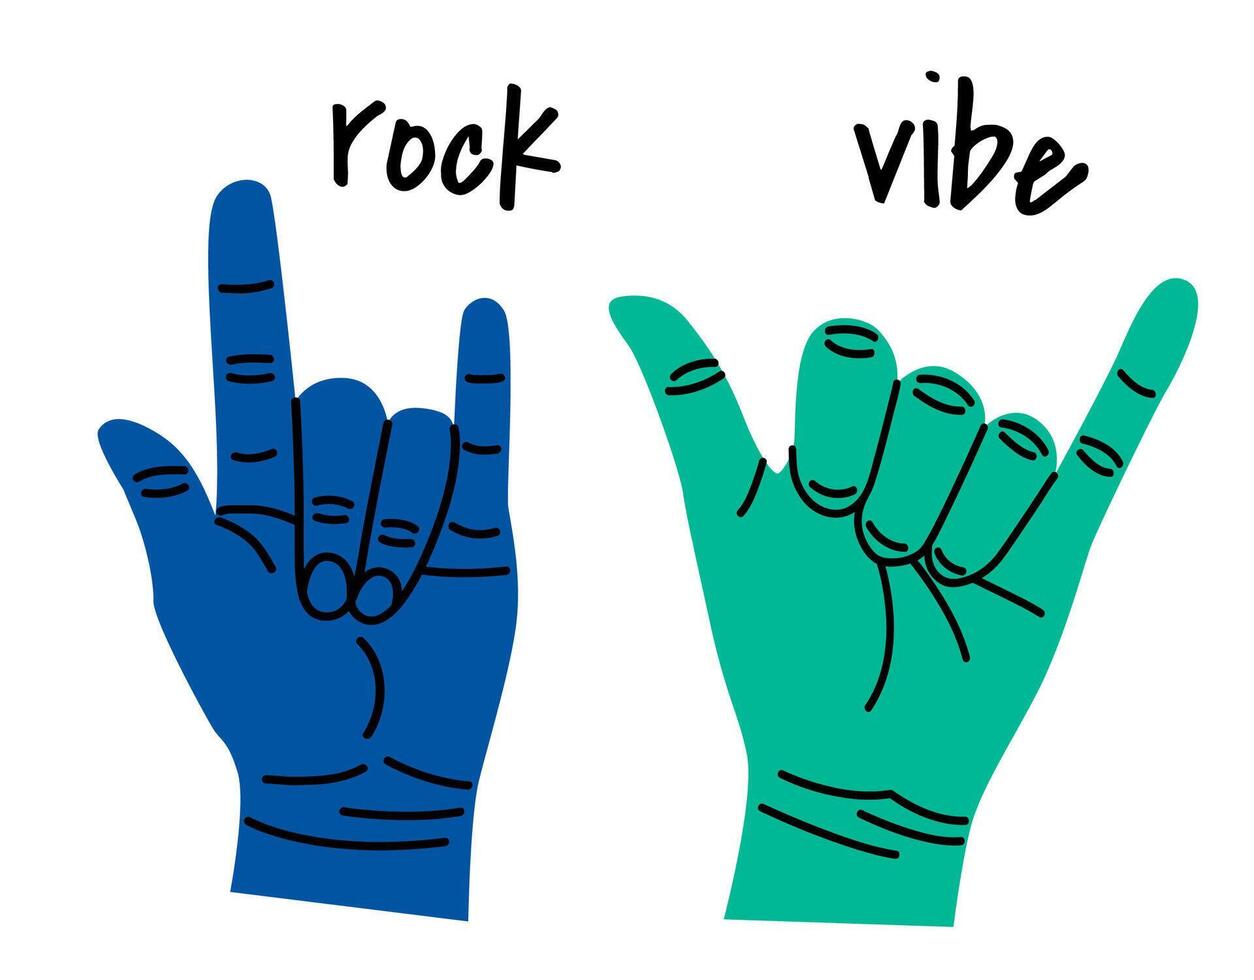 Set of colorful hands with different gestures. Modern trendy flat cartoon style. Hand drawn vector illustration. Hands show rock and vibe. Different signs and symbols.